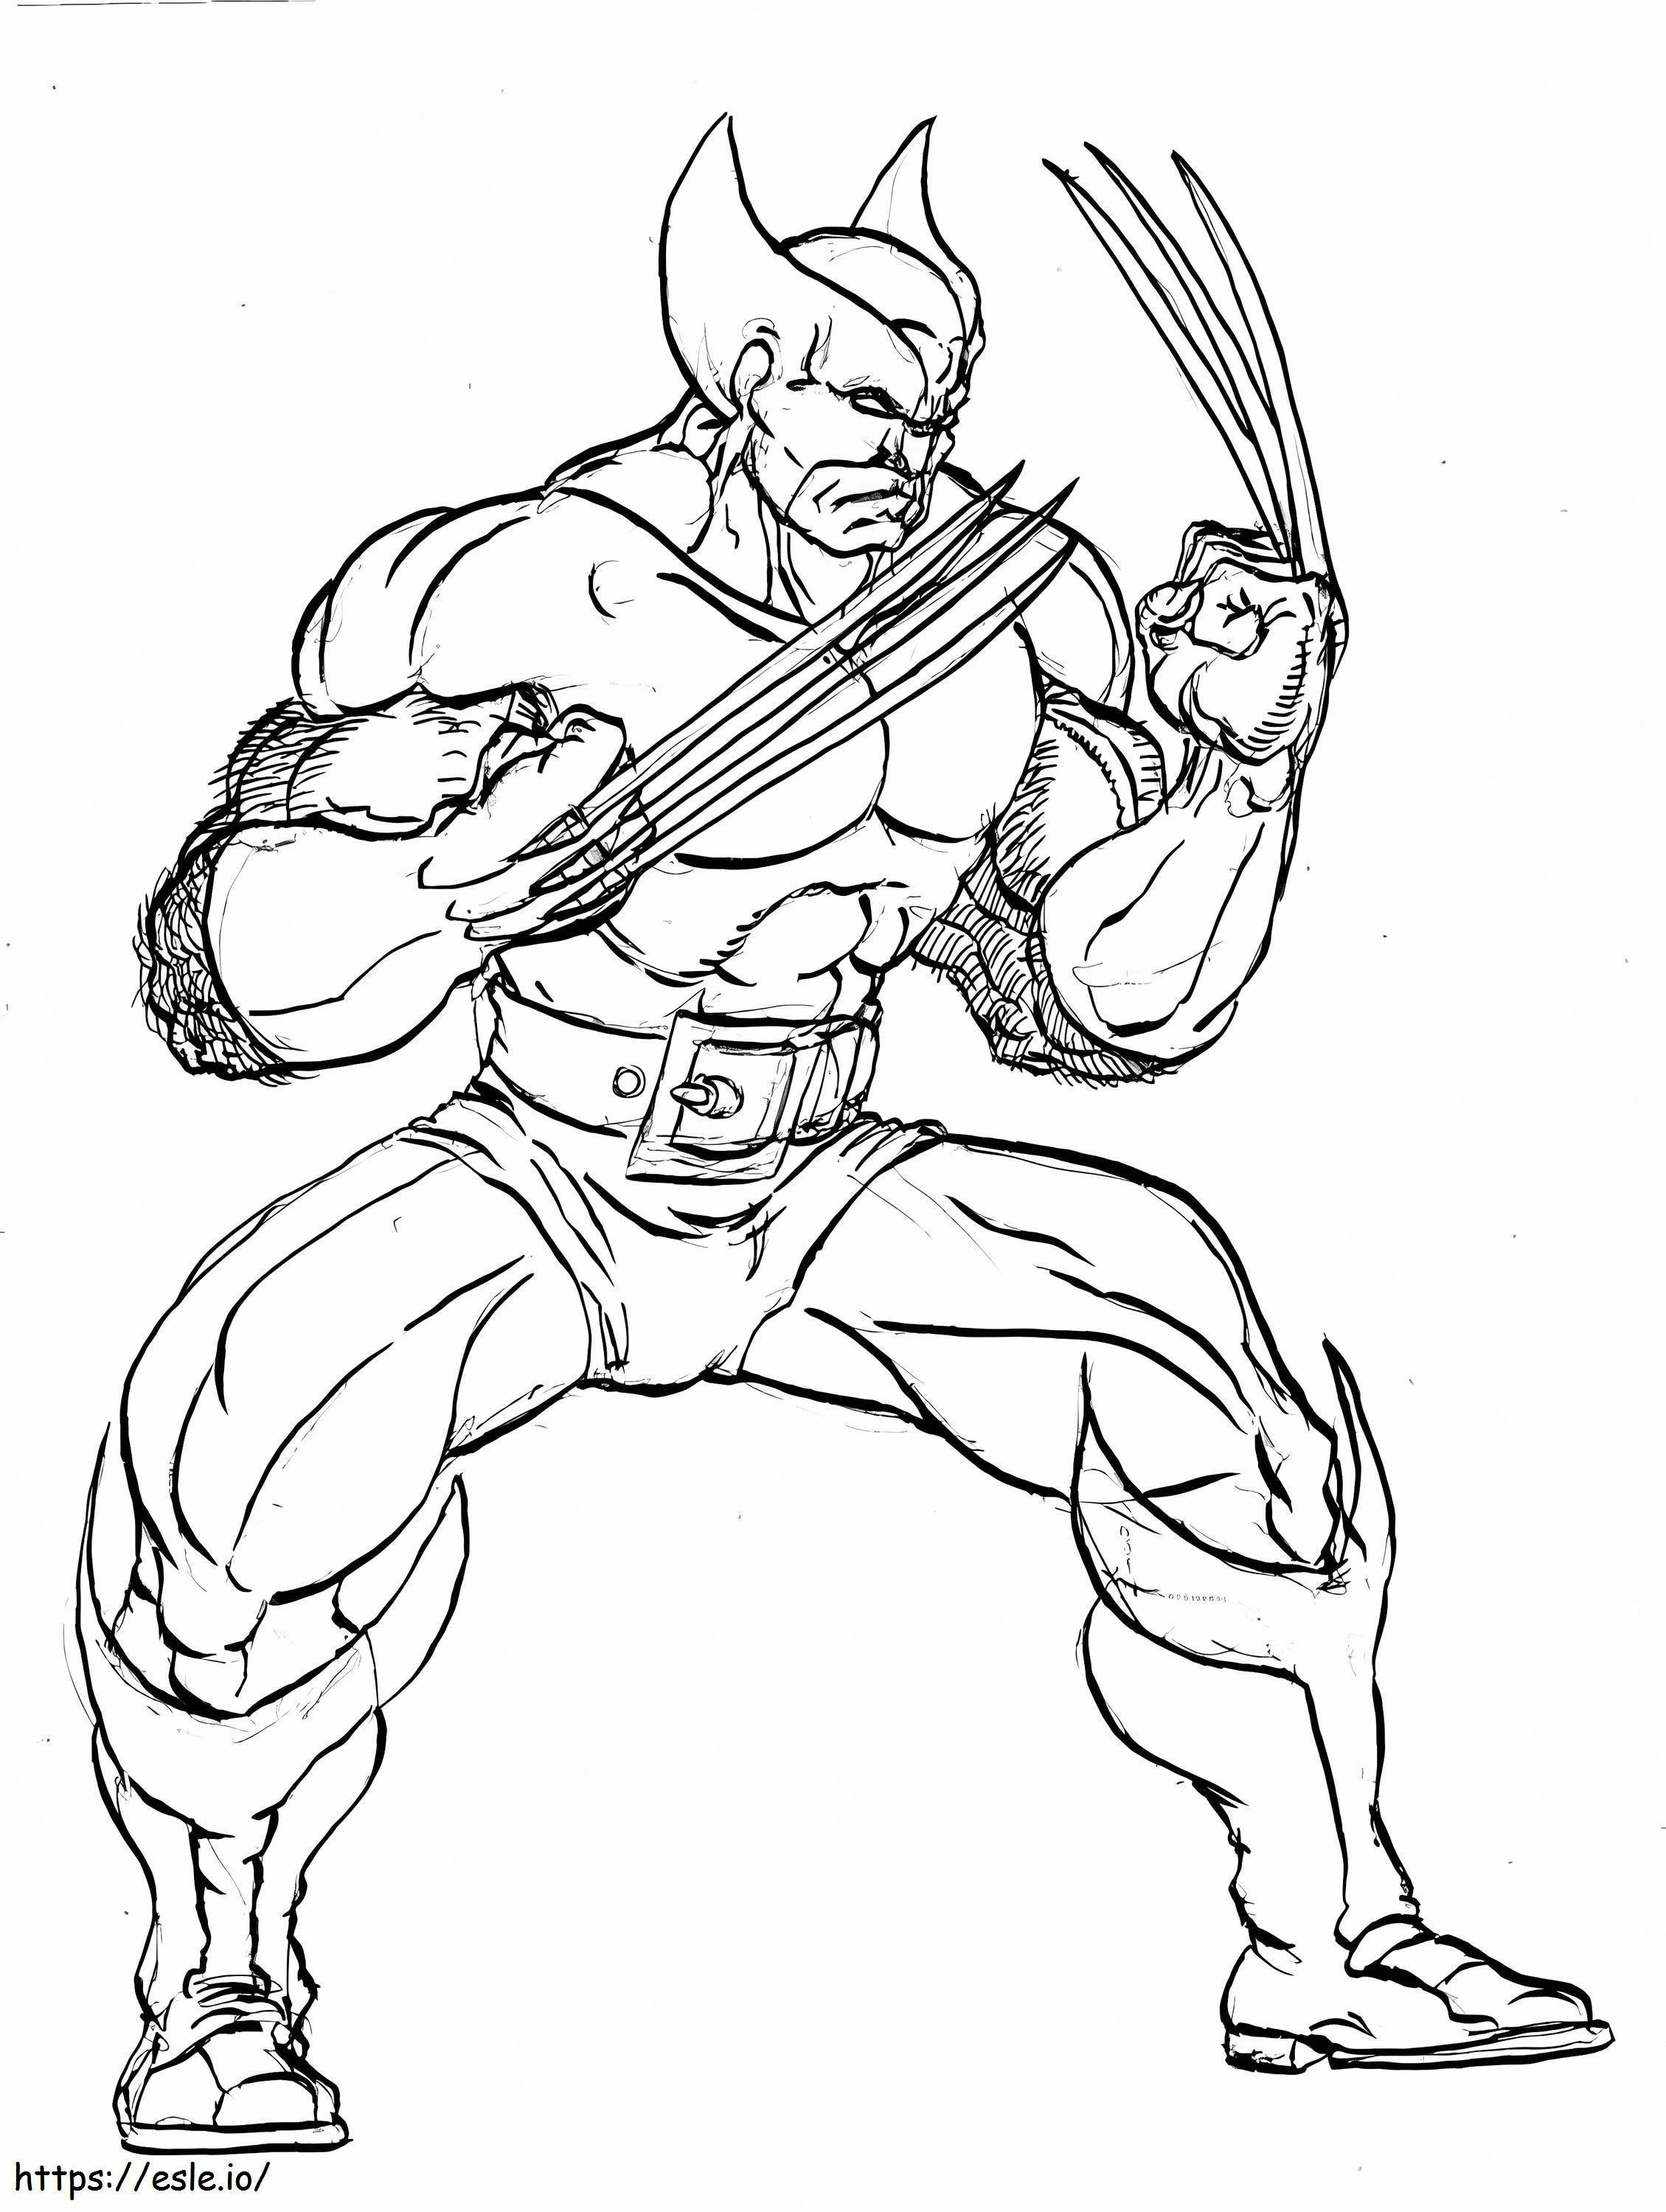 Strong Wolverine coloring page